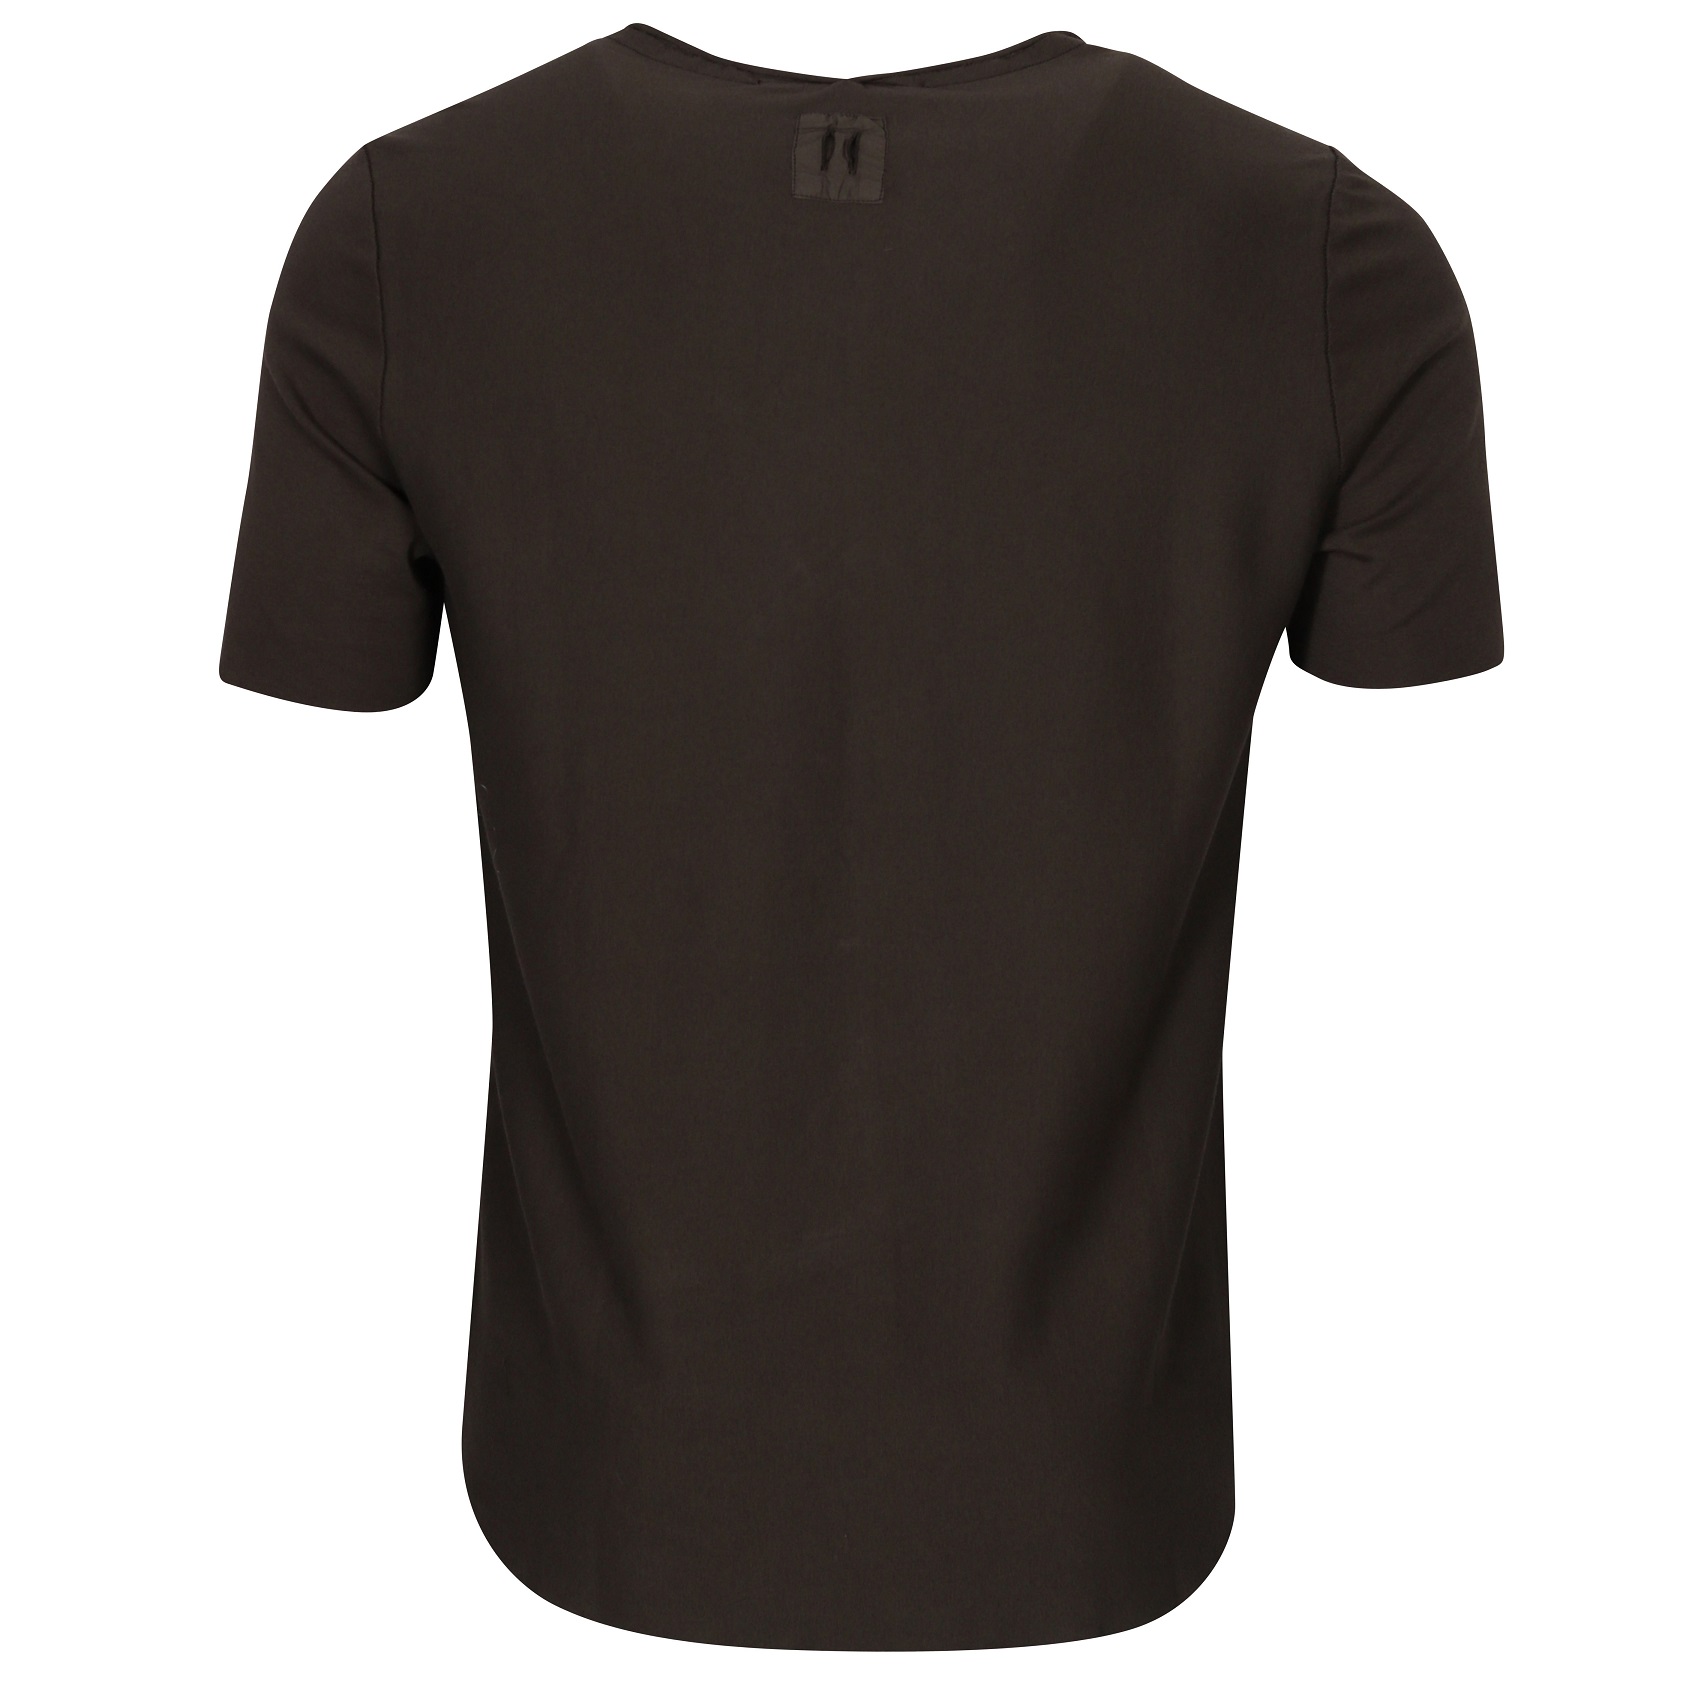 HANNES ROETHER T-Shirt in Dark Olive XL